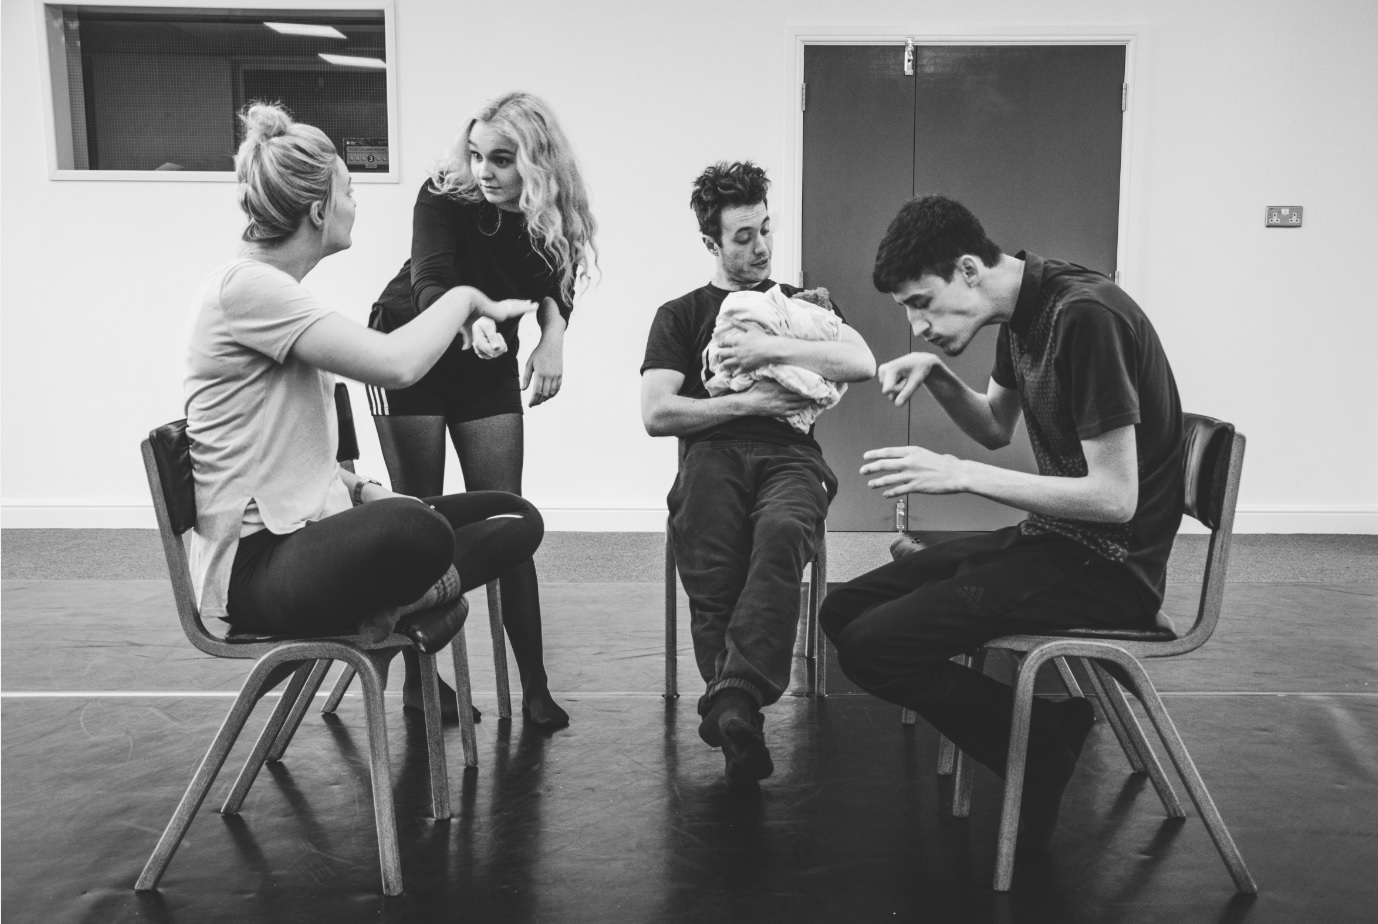 Performing arts students set to highlight children refugees problem